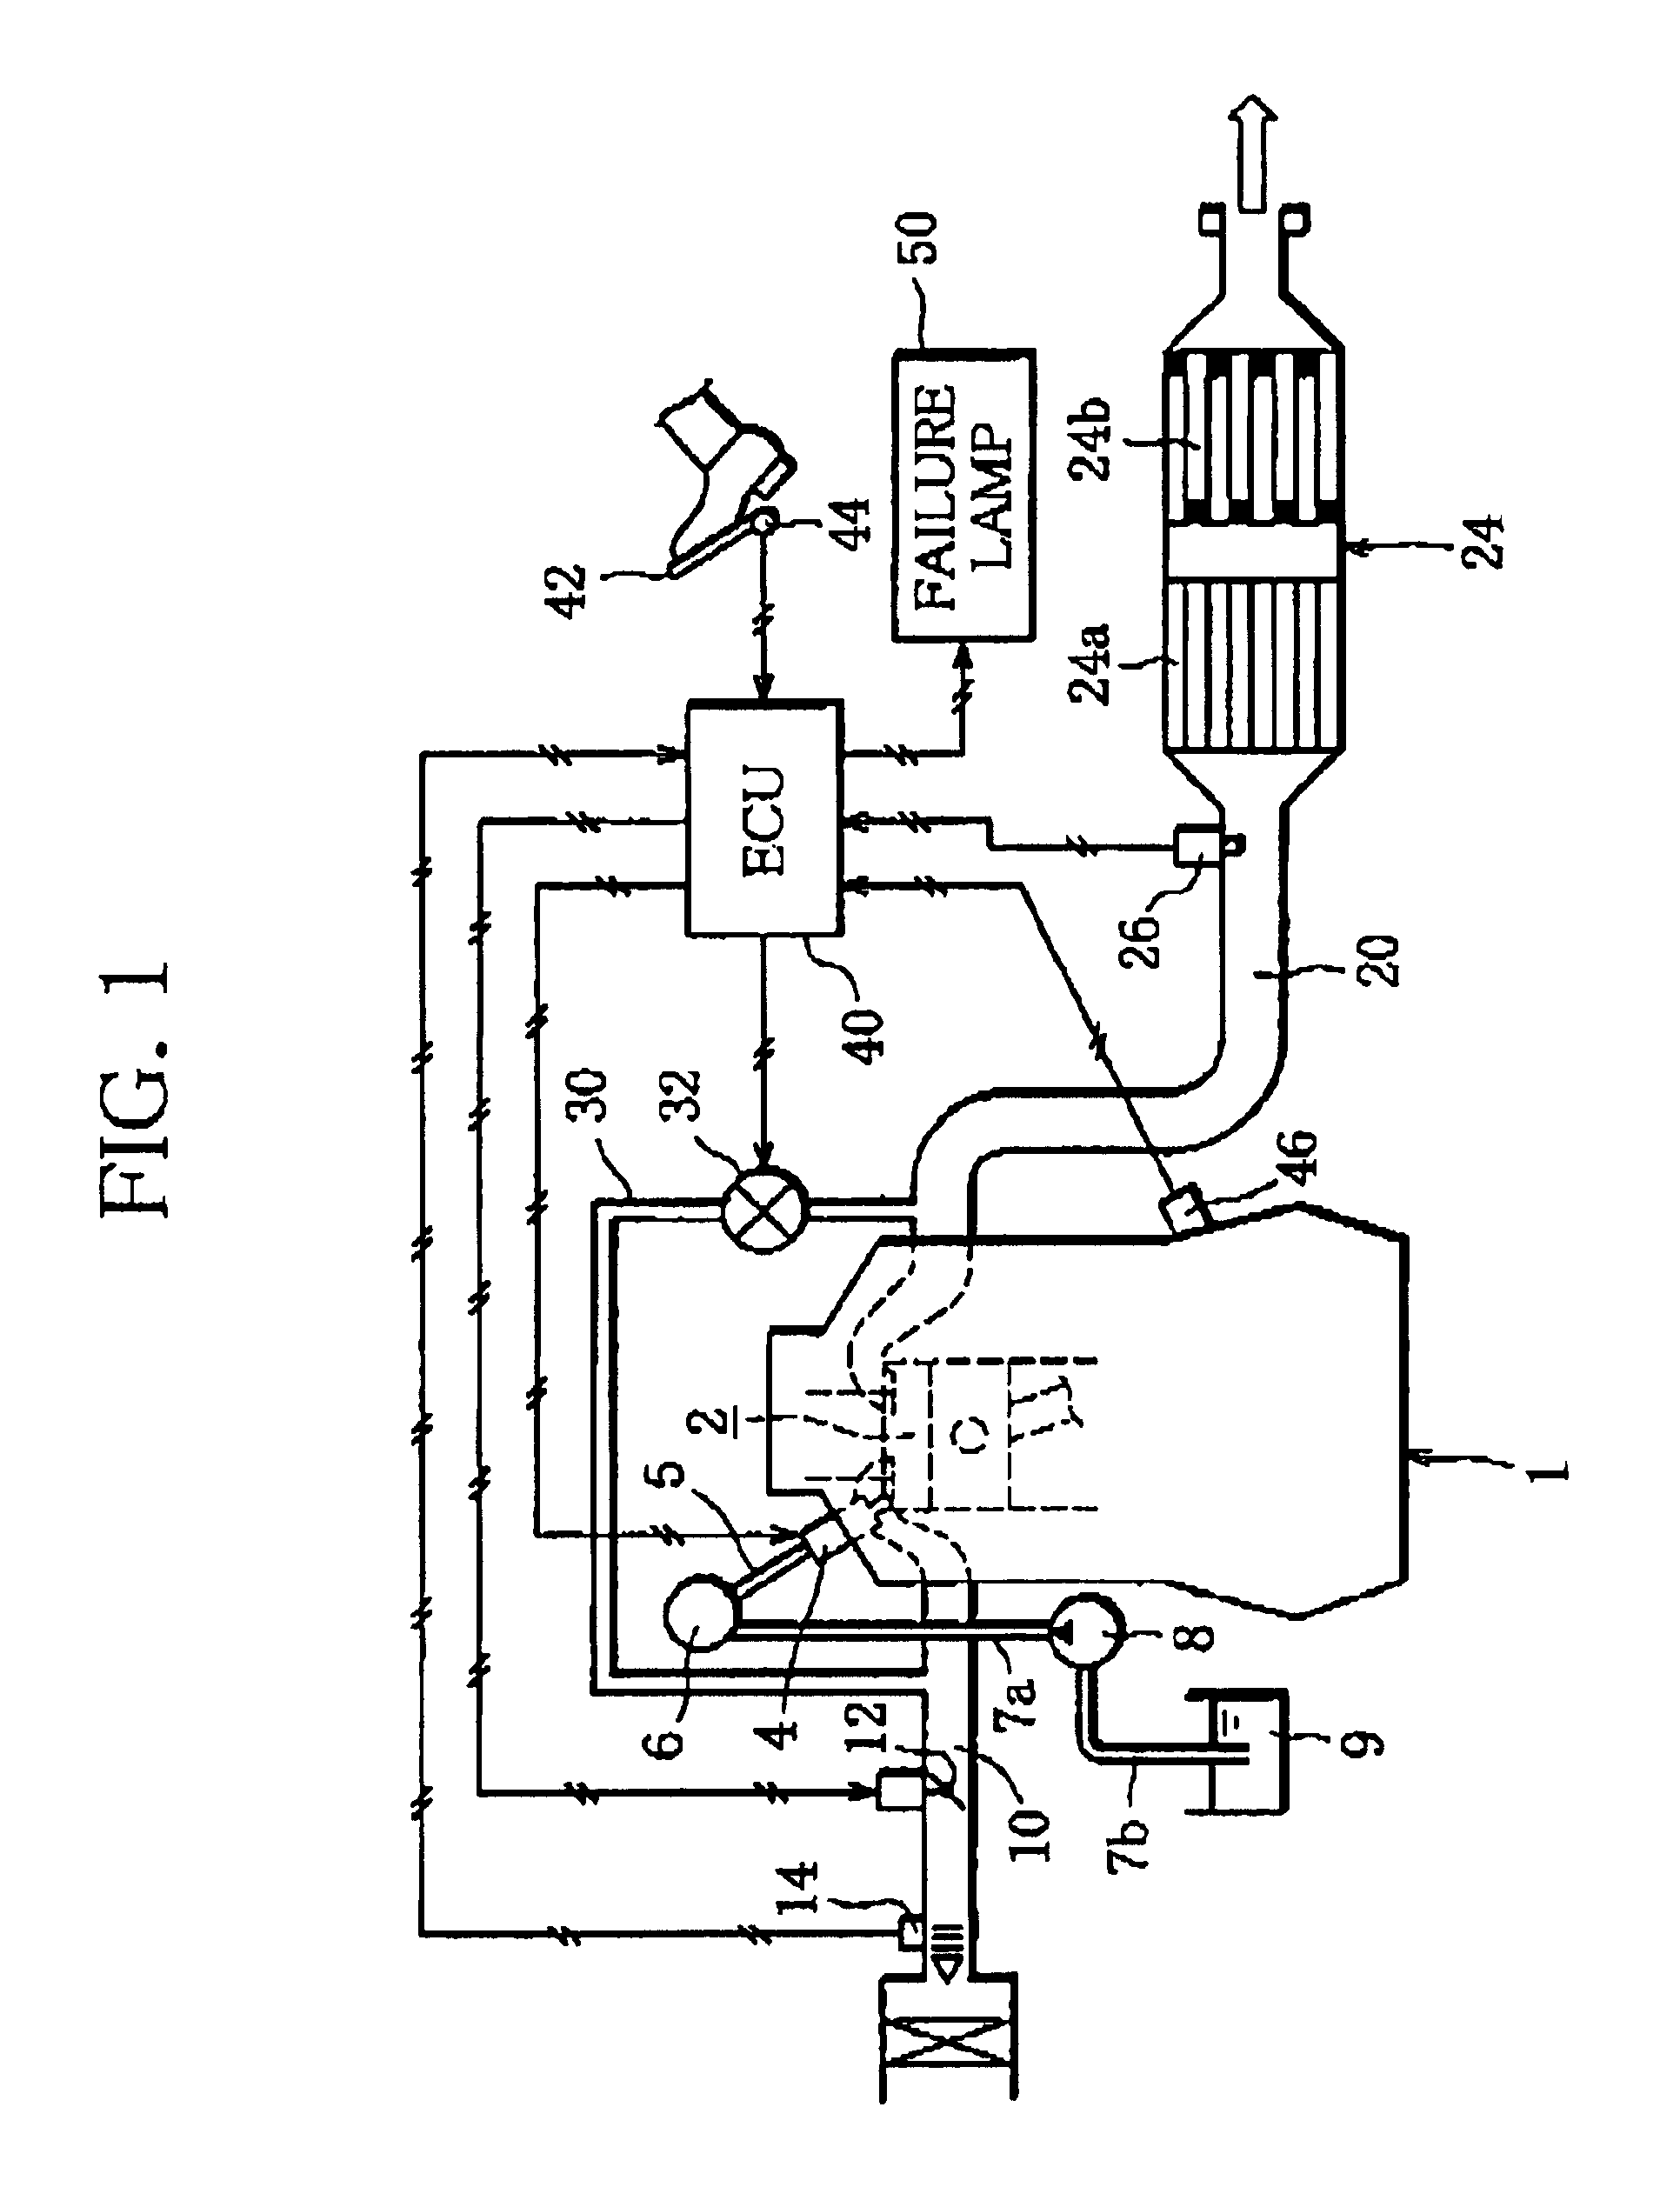 Failure detection apparatus for an internal combustion engine